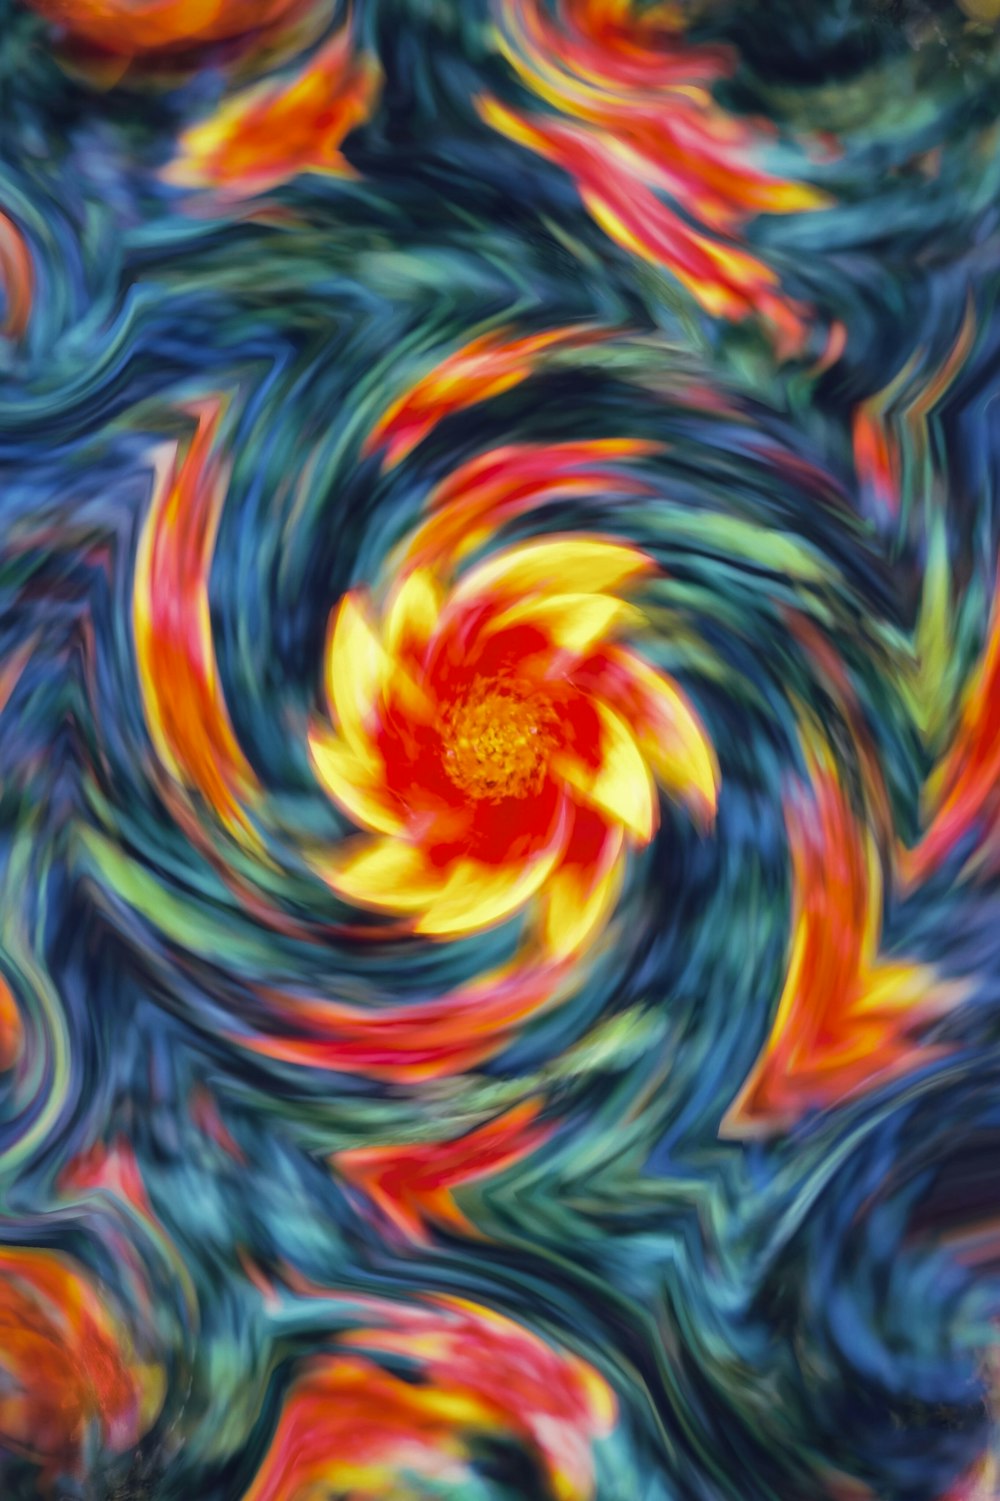 a red and yellow flower surrounded by blue and green swirls